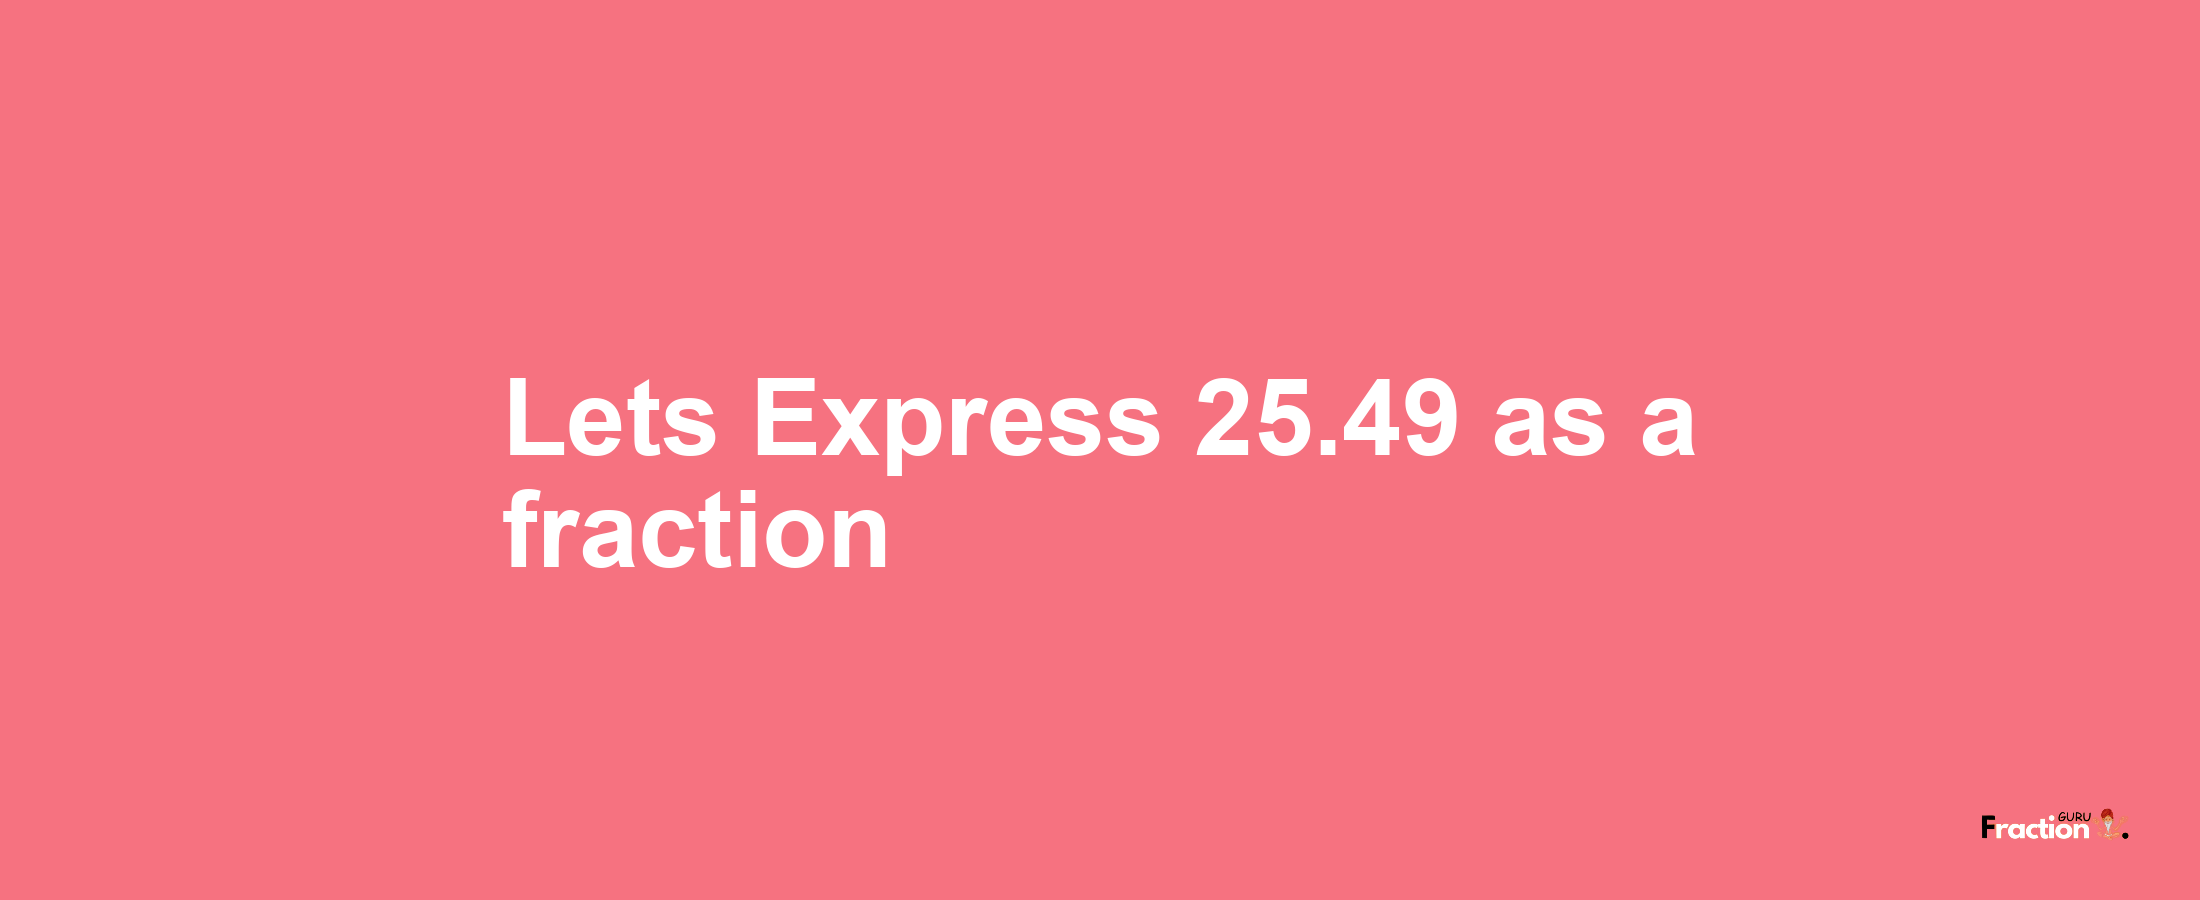 Lets Express 25.49 as afraction